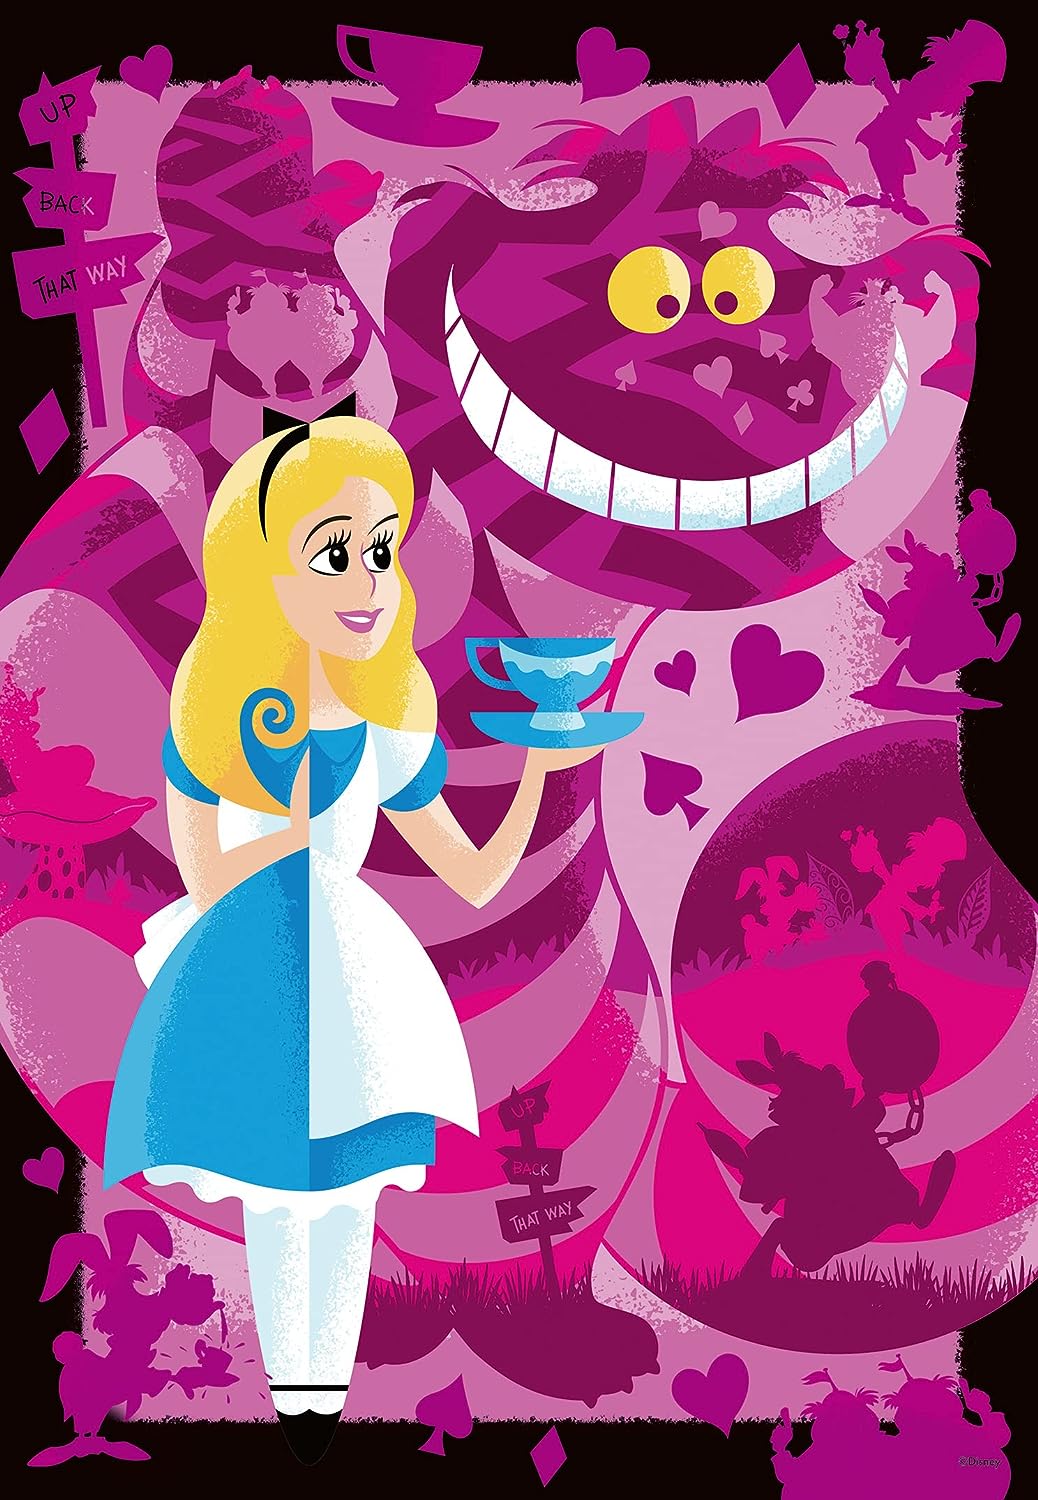 Ravensburger Disney 100th Anniversary Alice in Wonderland Jigsaw Puzzles for Adults and Kids